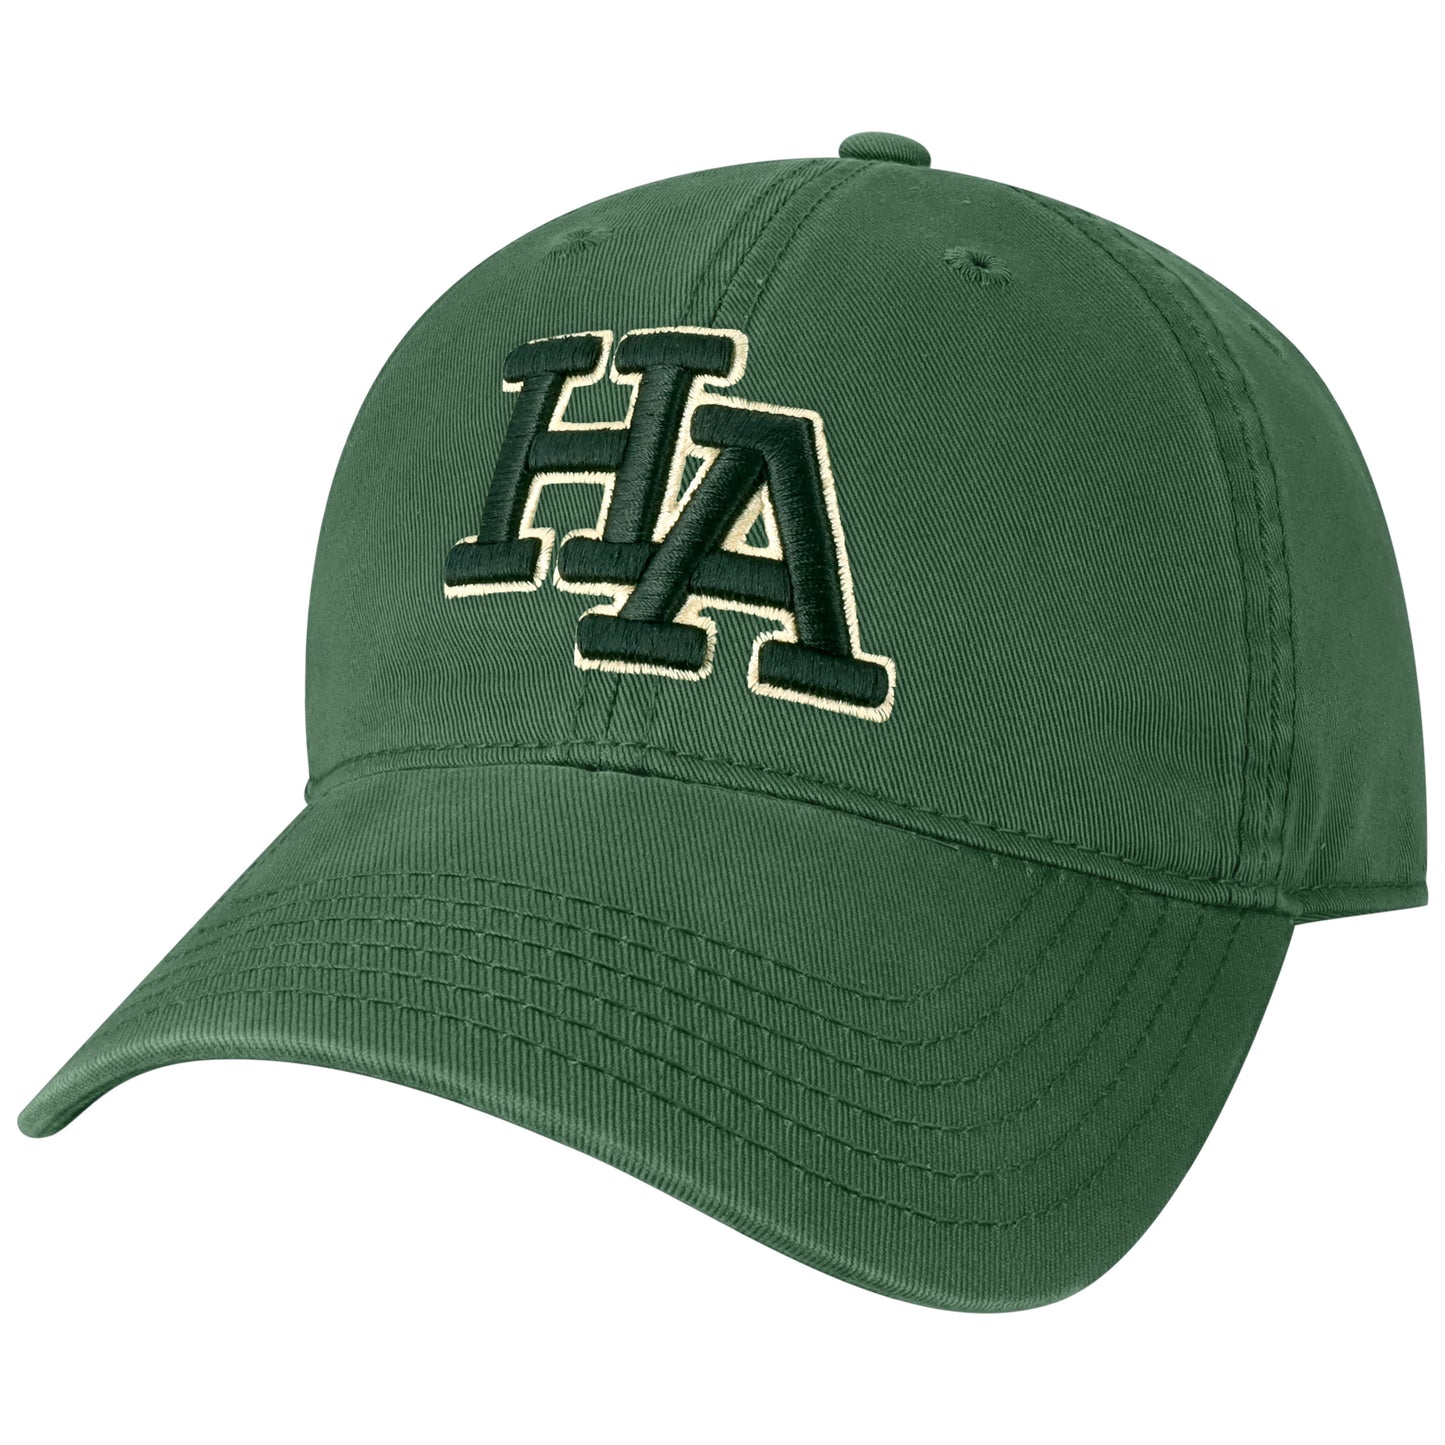 Hope Academy Relaxed Twill Hat